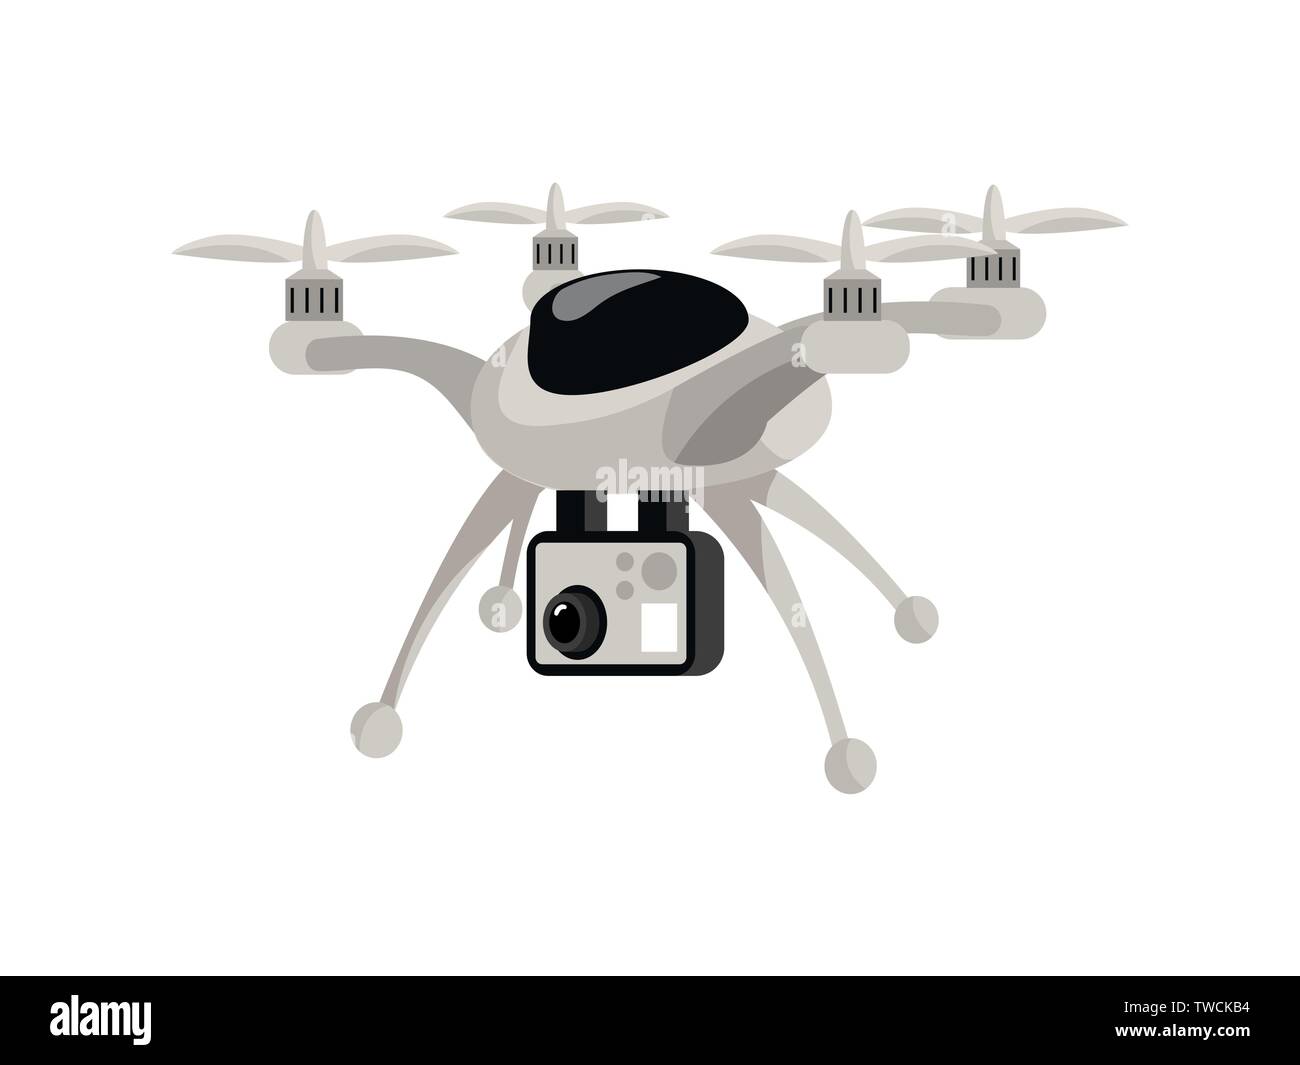 Drone flat vector color illustration. Cartoon flying copter with camera, quad rotor, aviation isolated design element. Digital technology, innovation, modern toy, videotaping device Stock Vector Art - Alamy